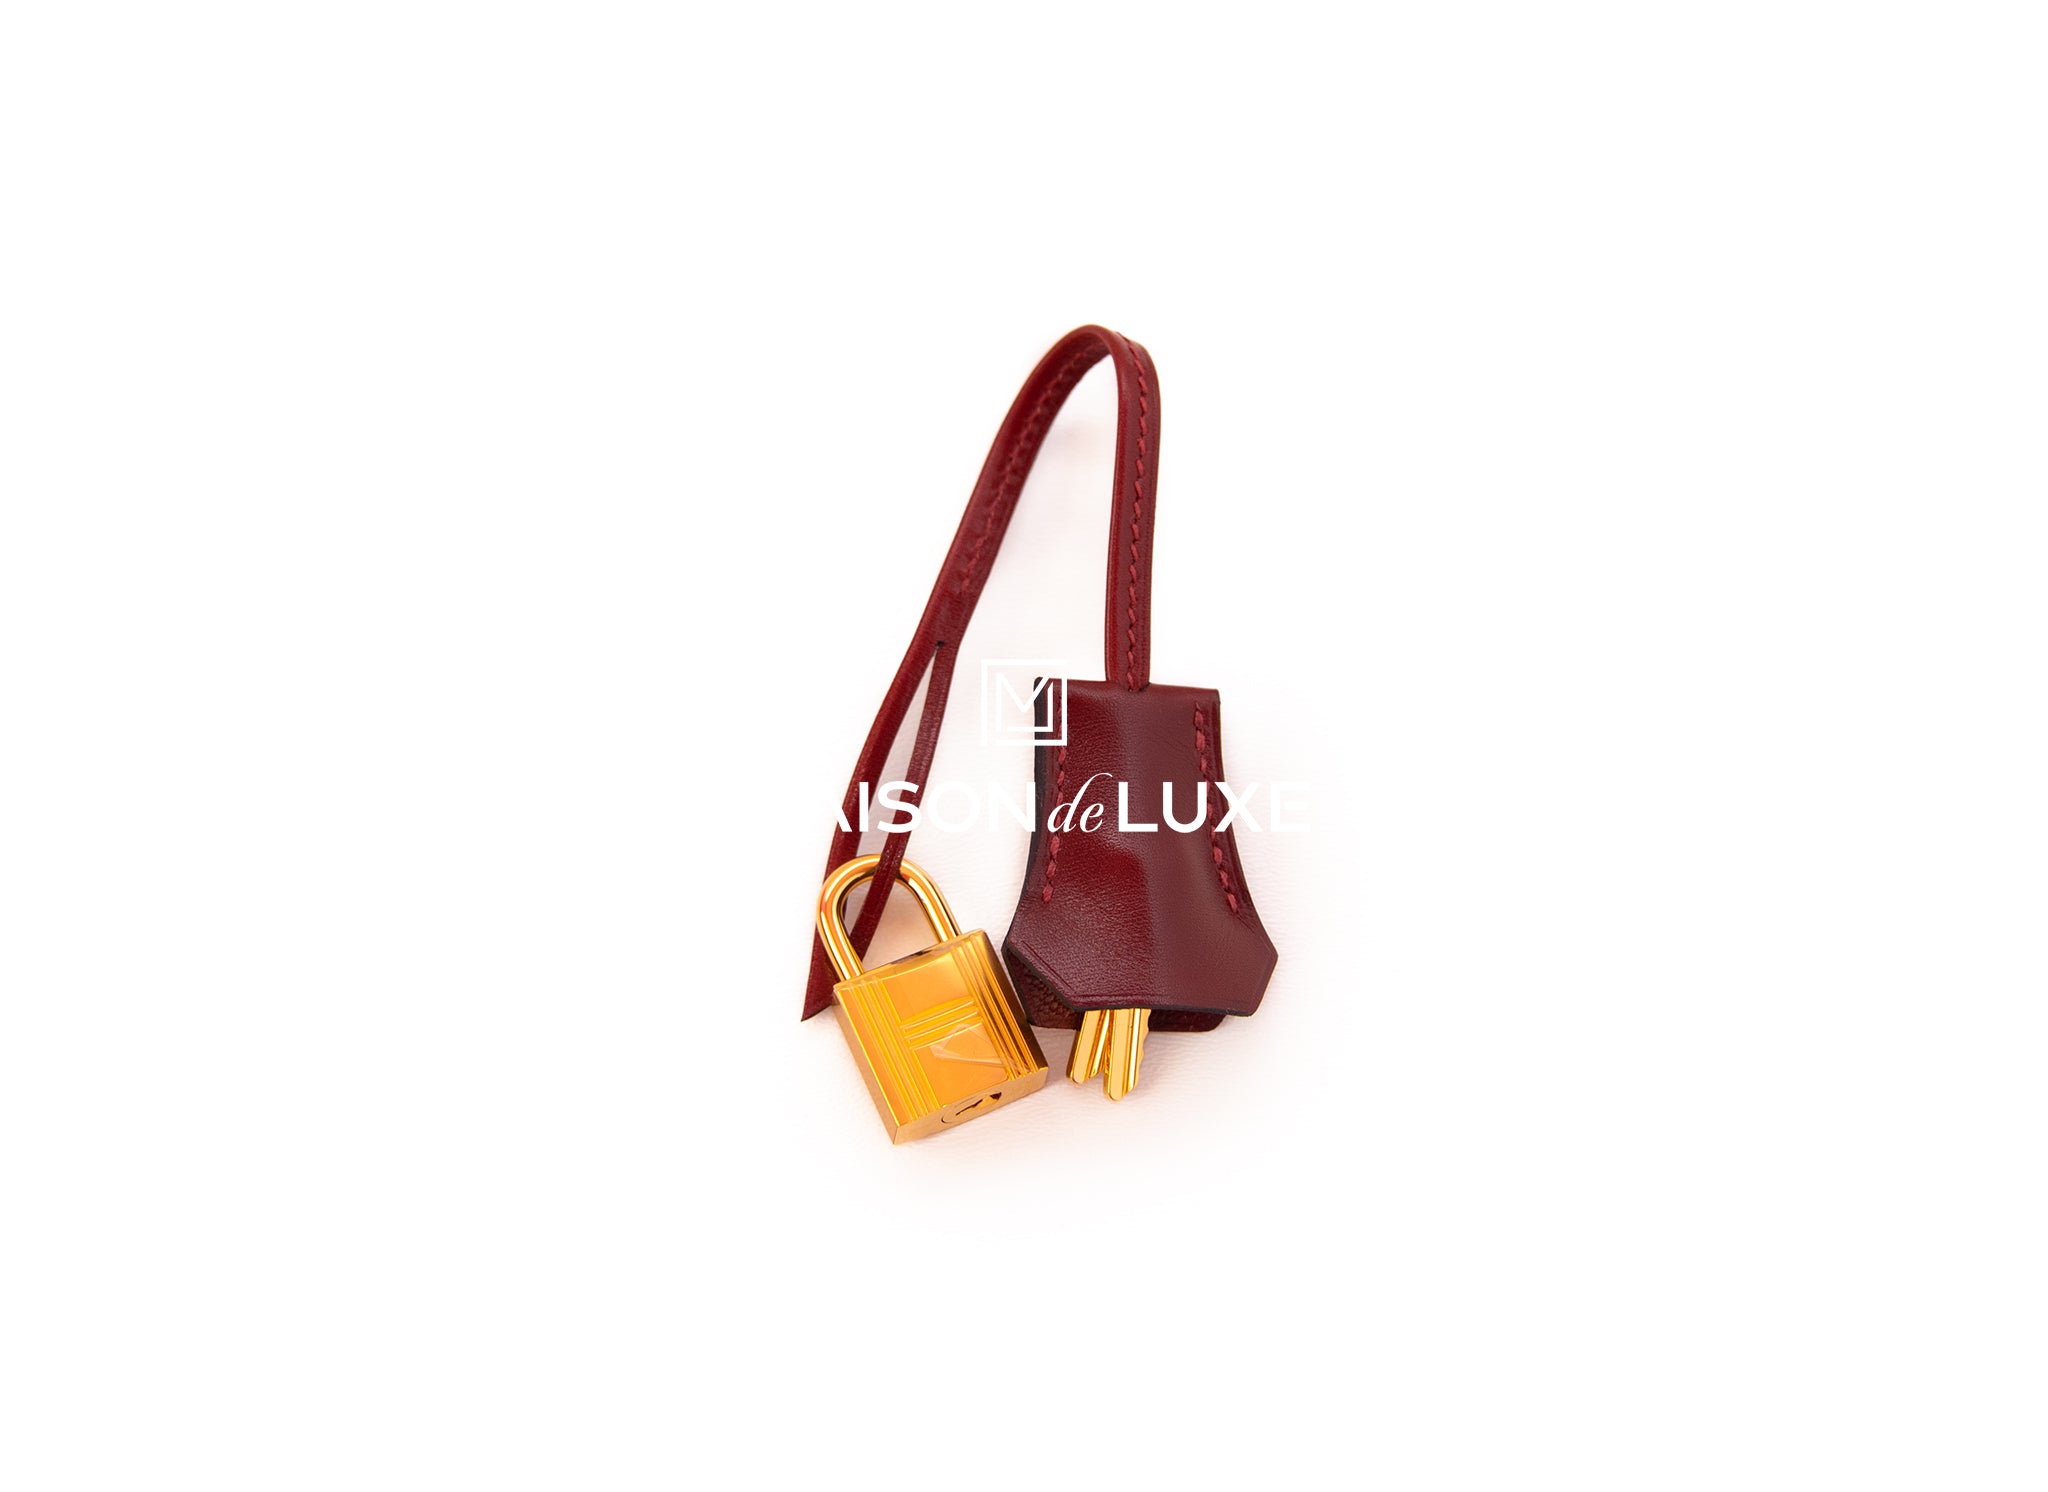 Used Hermes Handbags, Shoes, Jewelry & Accessories